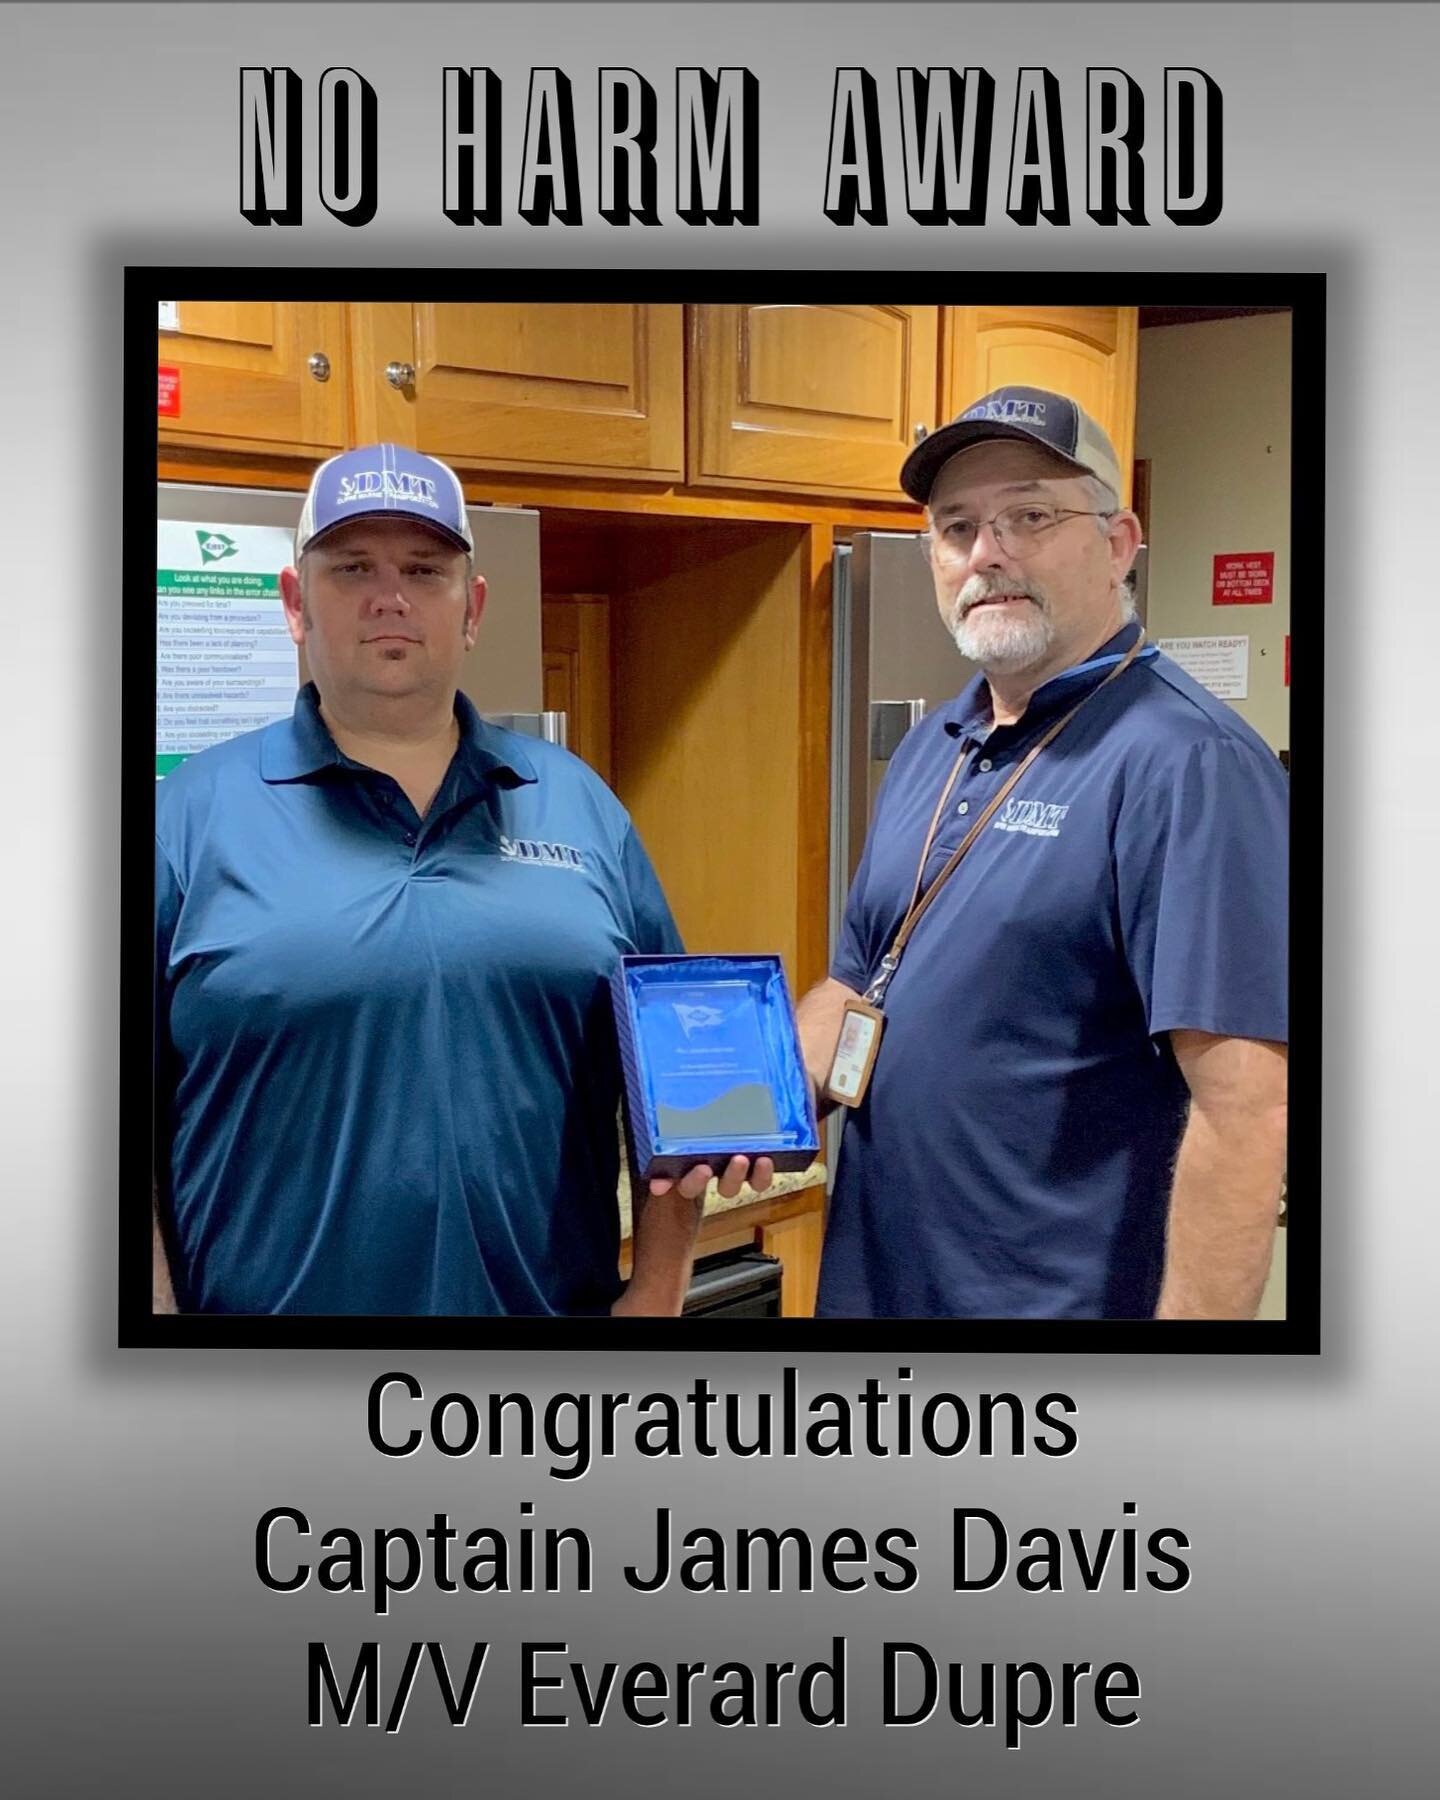 Congrats Captain James Tub Davis @slowpar_davis for your Kirby Inland Marine NO HARM AWARD for your Stop Work Responsibility!! Keeping it safe out there!!
🌟⛴⚓️🌟
Port Captain Frank Bumgarden presented Captain Tub with his award last week!
.
.
.
#cap